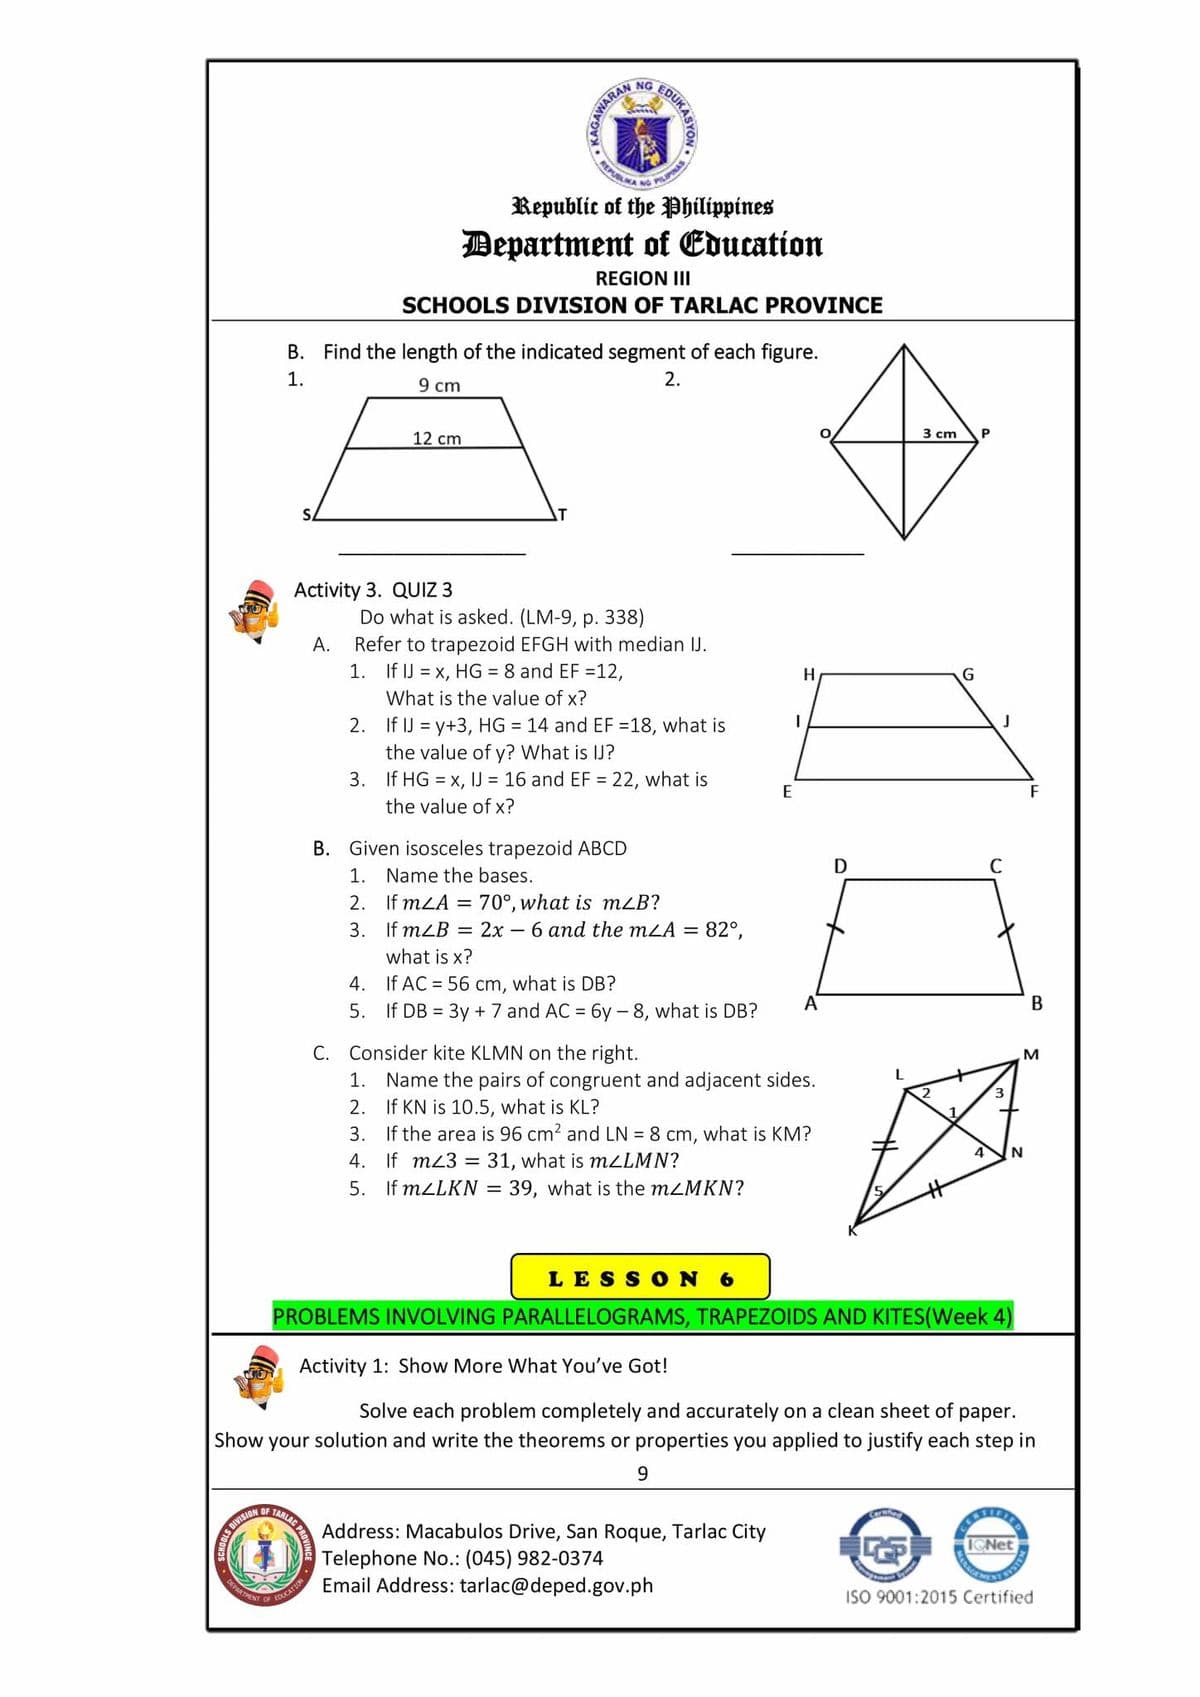 REM A NG PILIPINAS
NG
NAS
Republic of the Philippines
Department of Education
REGION III
SCHOOLS DIVISION OF TARLAC PROVINCE
B. Find the length of the indicated segment of each figure.
1.
2.
9 cm
12 cm
3 cm
P
Activity 3. QUIZ 3
Do what is asked. (LM-9, p. 338)
Refer to trapezoid EFGH with median IJ.
1. If IJ = x, HG = 8 and EF =12,
А.
H
G
What is the value of x?
2. If IJ = y+3, HG = 14 and EF =18, what is
the value of y? What is IJ?
3. If HG = x, IJ = 16 and EF = 22, what is
E
F
the value of x?
B. Given isosceles trapezoid ABCD
1. Name the bases.
2. If mLA = 70°, what is mLB?
3. If mLB = 2x – 6 and the mLA = 82°,
what is x?
4. If AC = 56 cm, what is DB?
5. If DB = 3y + 7 and AC = 6y - 8, what is DB?
A
C. Consider kite KLMN on the right.
1. Name the pairs of congruent and adjacent sides.
2. If KN is 10.5, what is KL?
3. If the area is 96 cm? and LN = 8 cm, what is KM?
4. If mz3 = 31, what is MLLMN?
5. If MZLKN =
4
N
39, what is the mzMKN?
LES SON 6
PROBLEMS INVOLVING PARALLELOGRAMS, TRAPEZOIDS AND KITES(Week 4)
Activity 1: Show More What You've Got!
Solve each problem completely and accurately on a clean sheet of paper.
Show your solution and write the theorems or properties you applied to justify each step in
9.
OF
NOISIAIO ST
Address: Macabulos Drive, San Roque, Tarlac City
Telephone No.: (045) 982-0374
Email Address: tarlac@deped.gov.ph
DEPARTEN
ISO 9001:2015 Certified
OF
EDUCATION
FOUKASYON
REM
KAGAWAR
MANAGA
ARLAC PROVING
